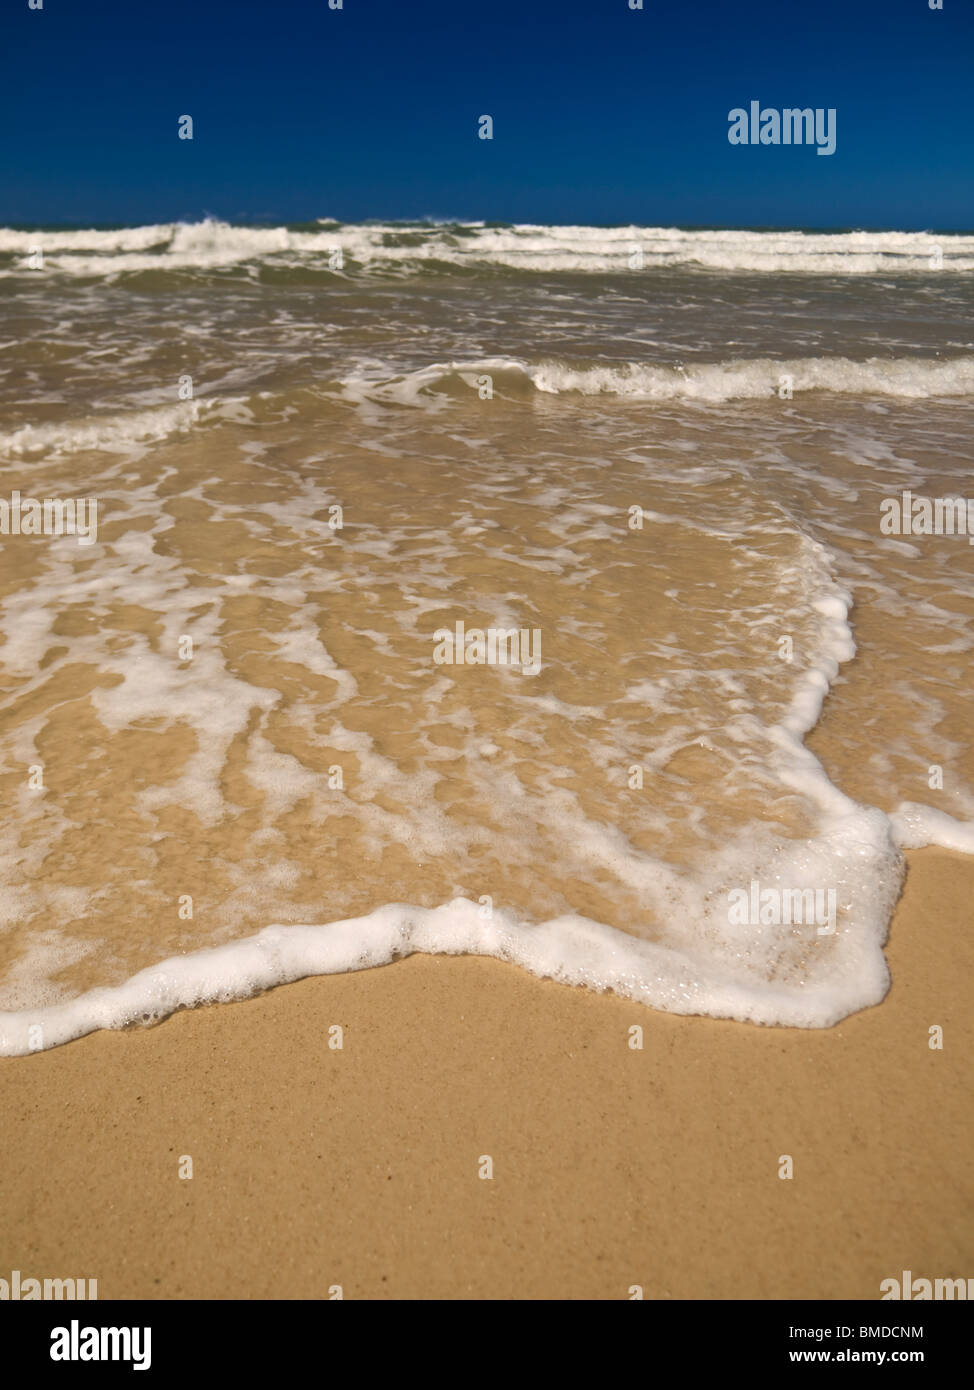 A small wave is coming to the beach sand. Stock Photo